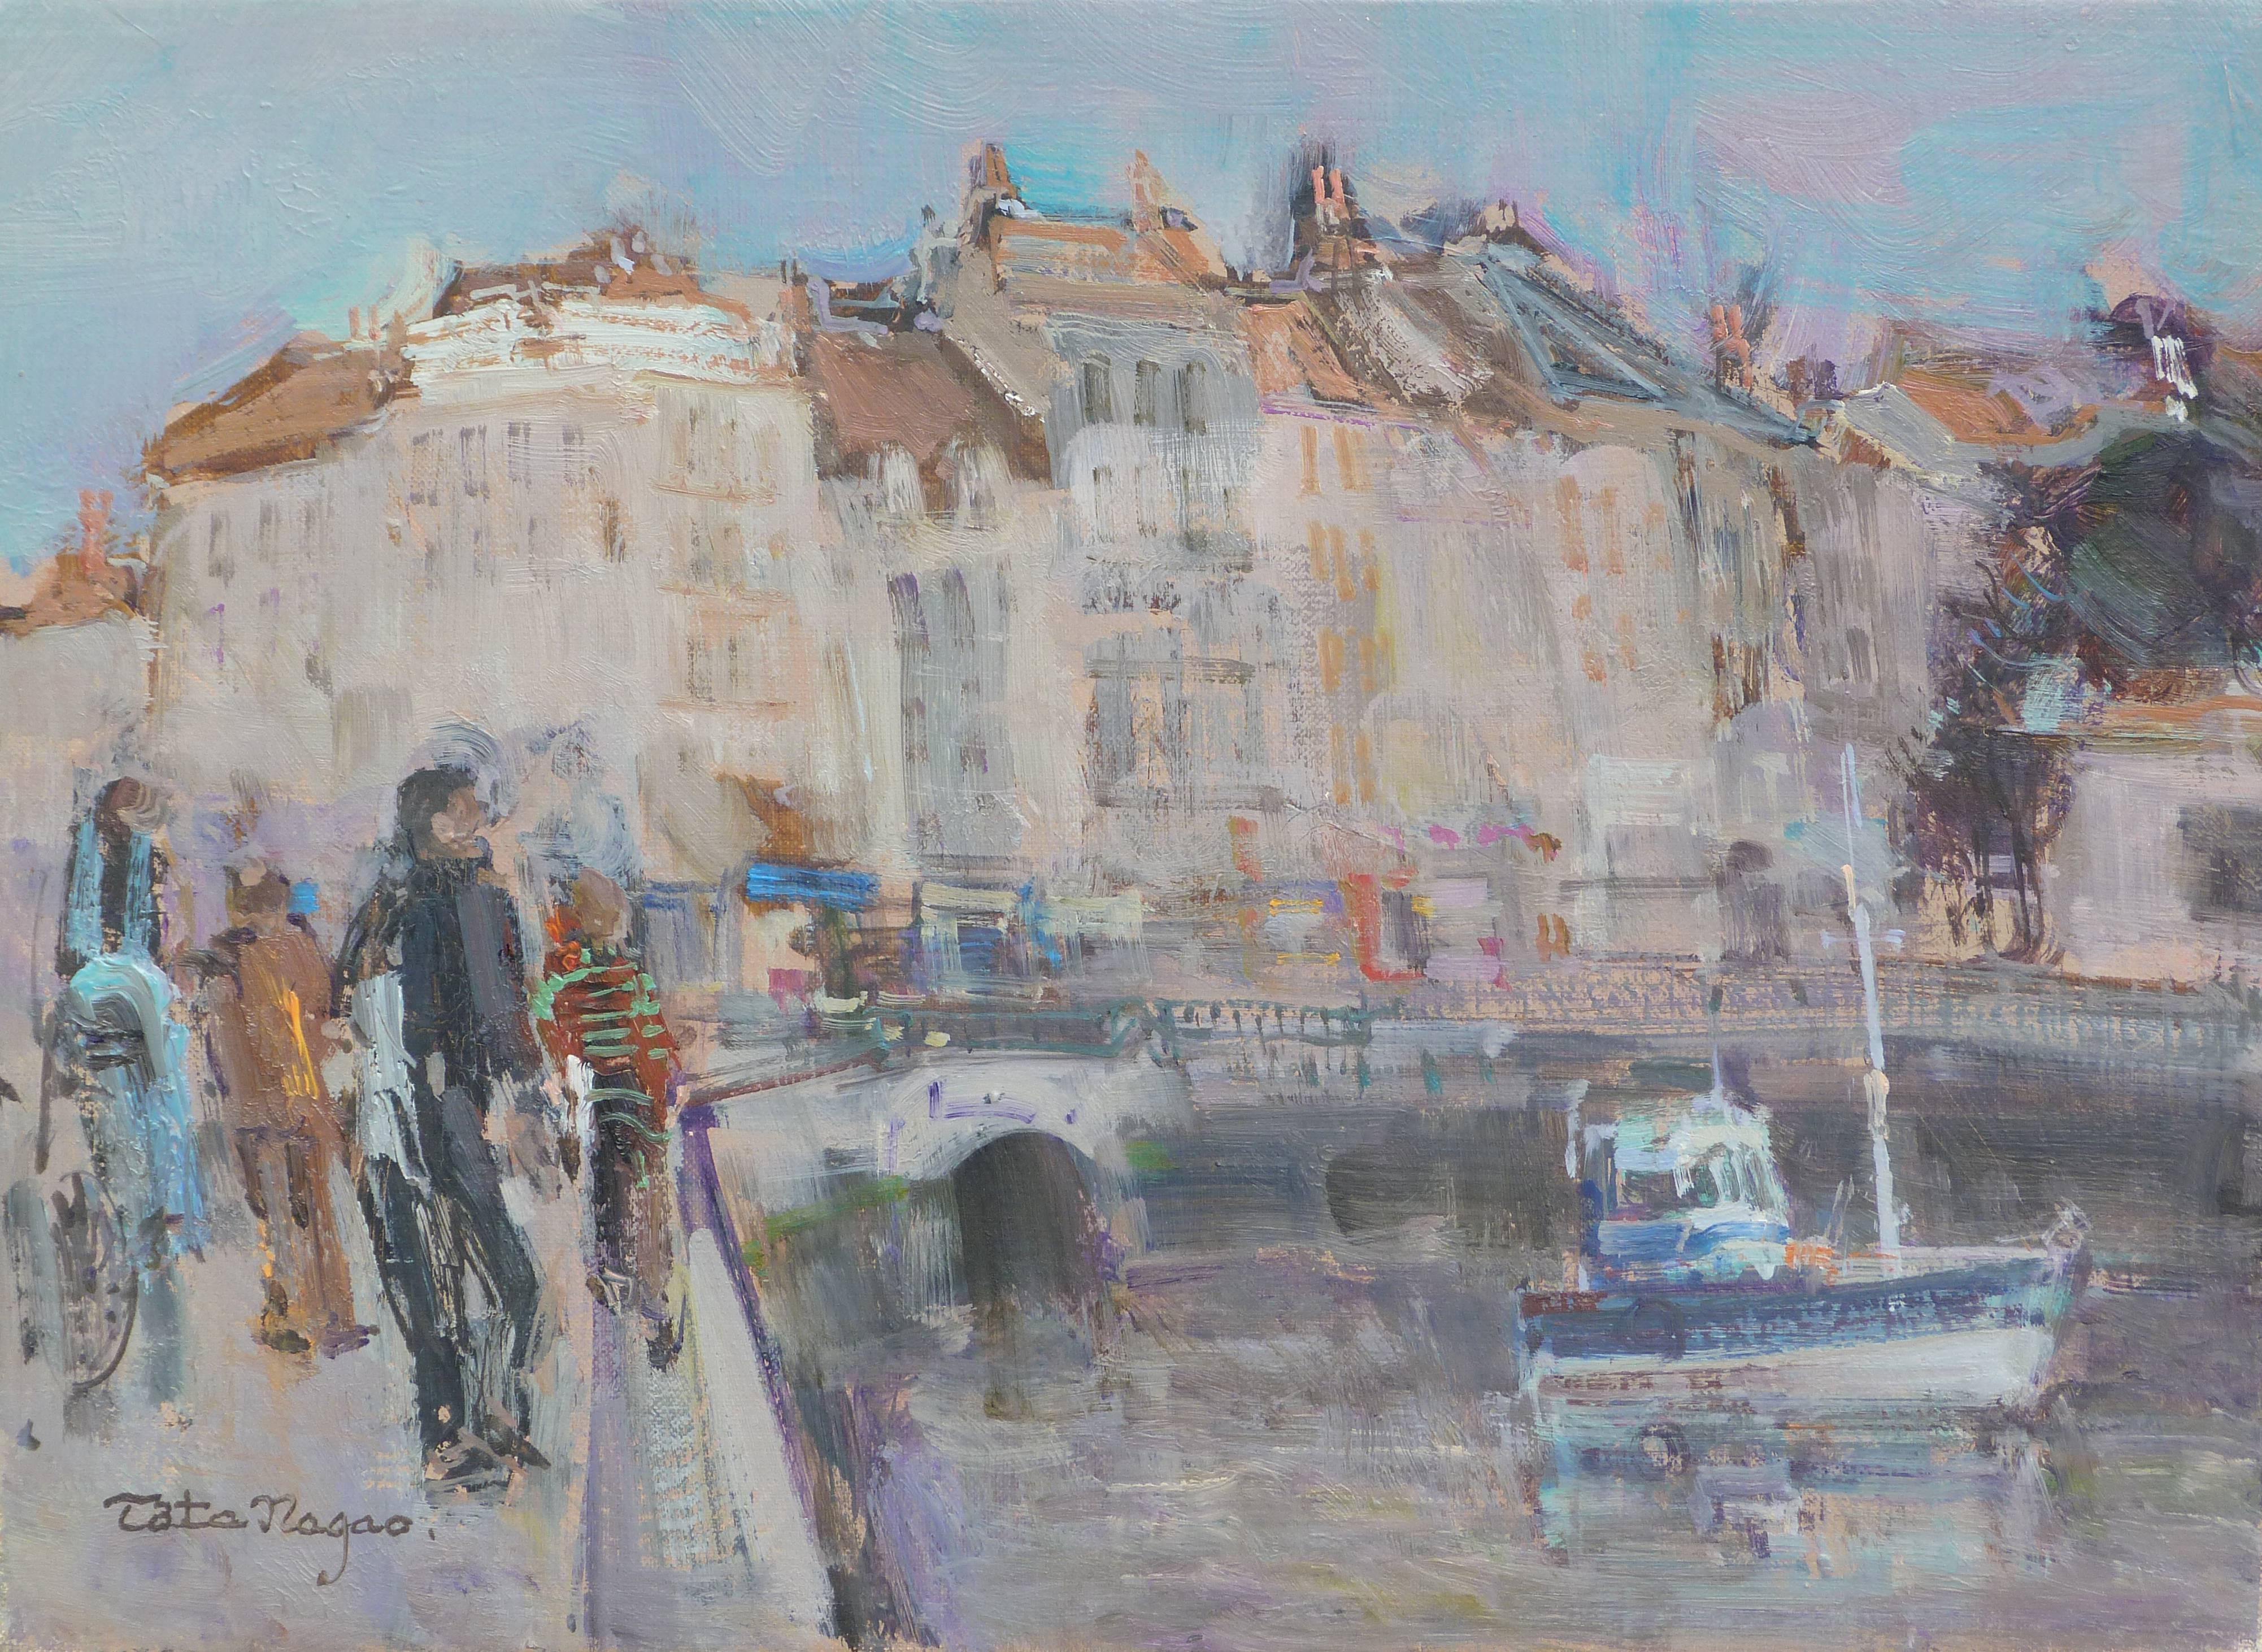 Tota NAGAO Landscape Painting - The seaport of La Rochelle in France